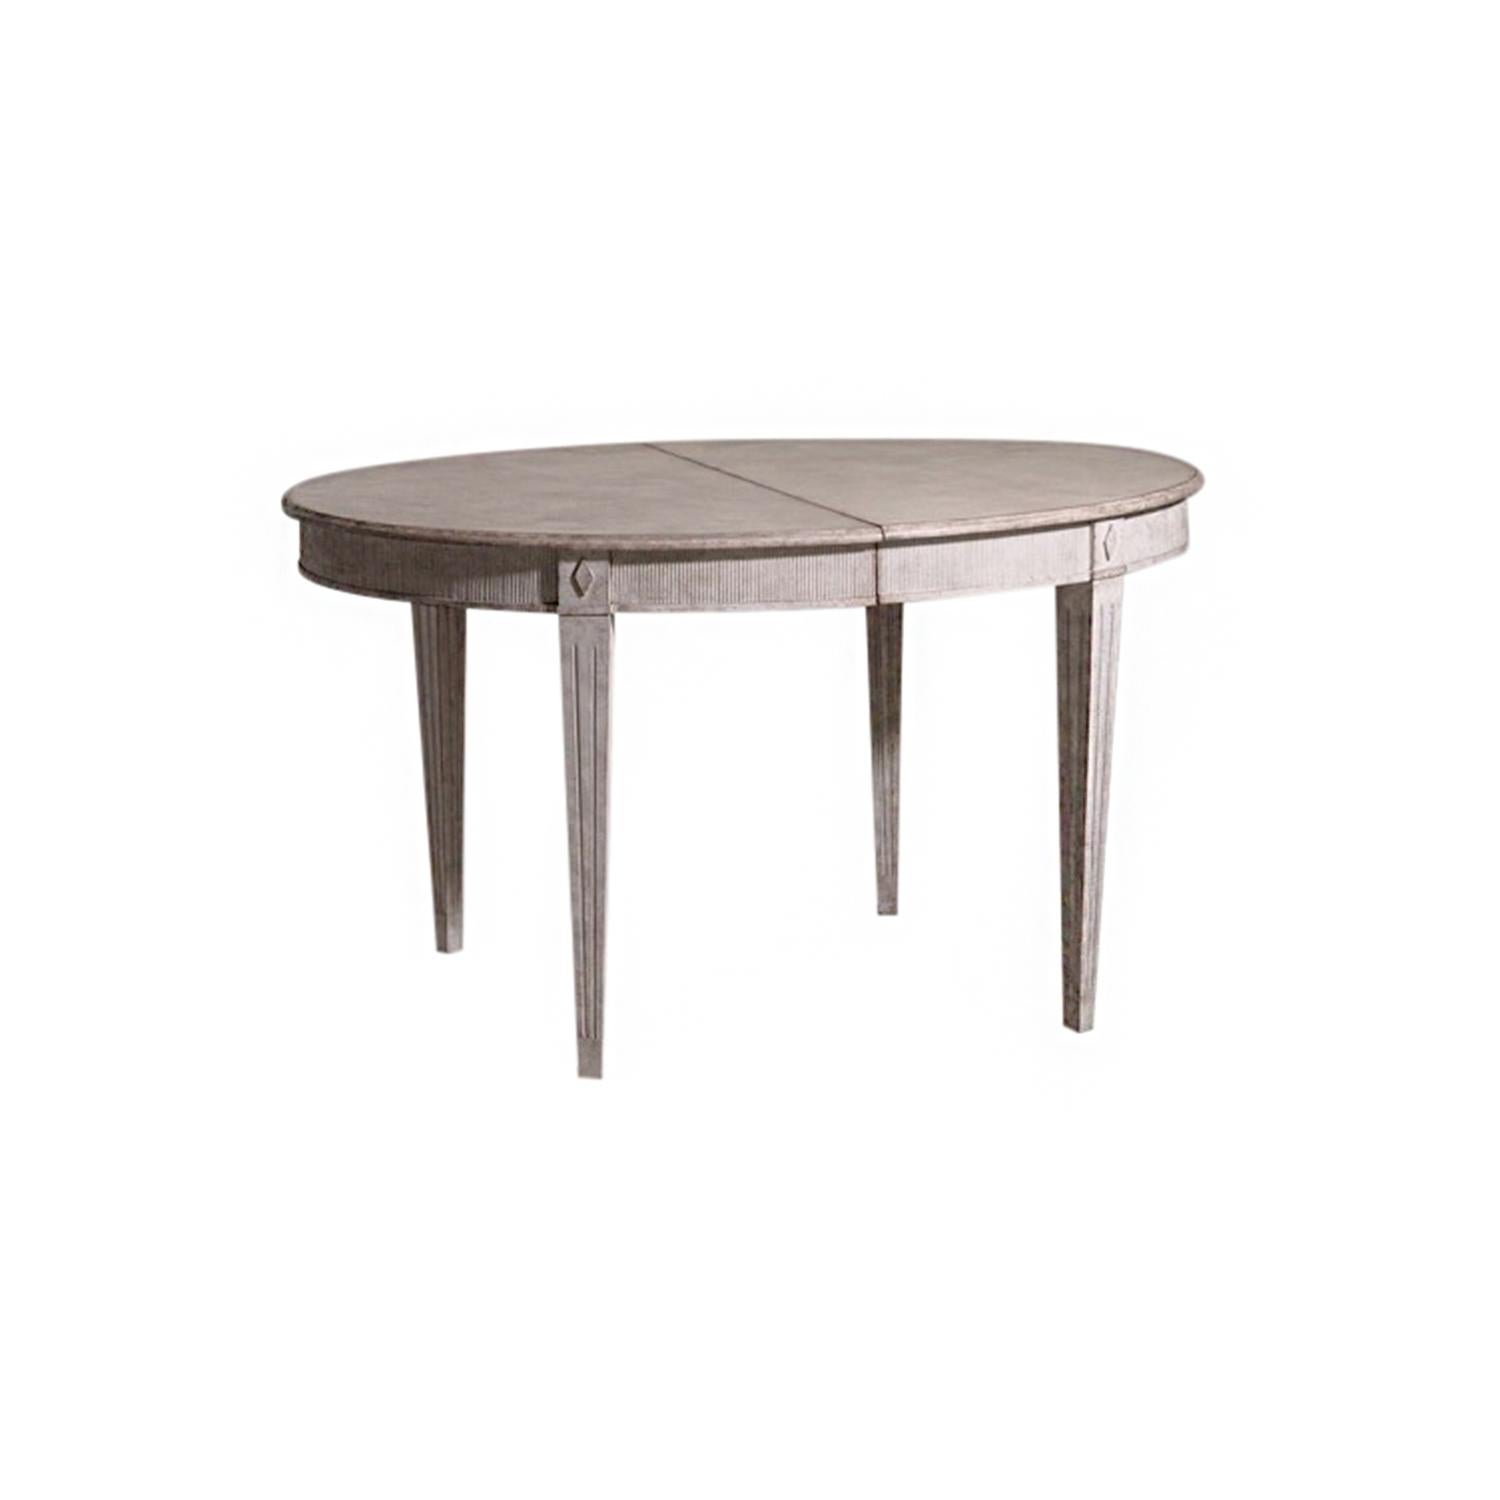 A light-grey, antique Swedish Gustavian extendable dining table made of hand carved Pinewood with two leaves and apron, enhanced by wood carvings. The Scandinavian half round table is standing on four straight square tapered fluted legs, detailed in